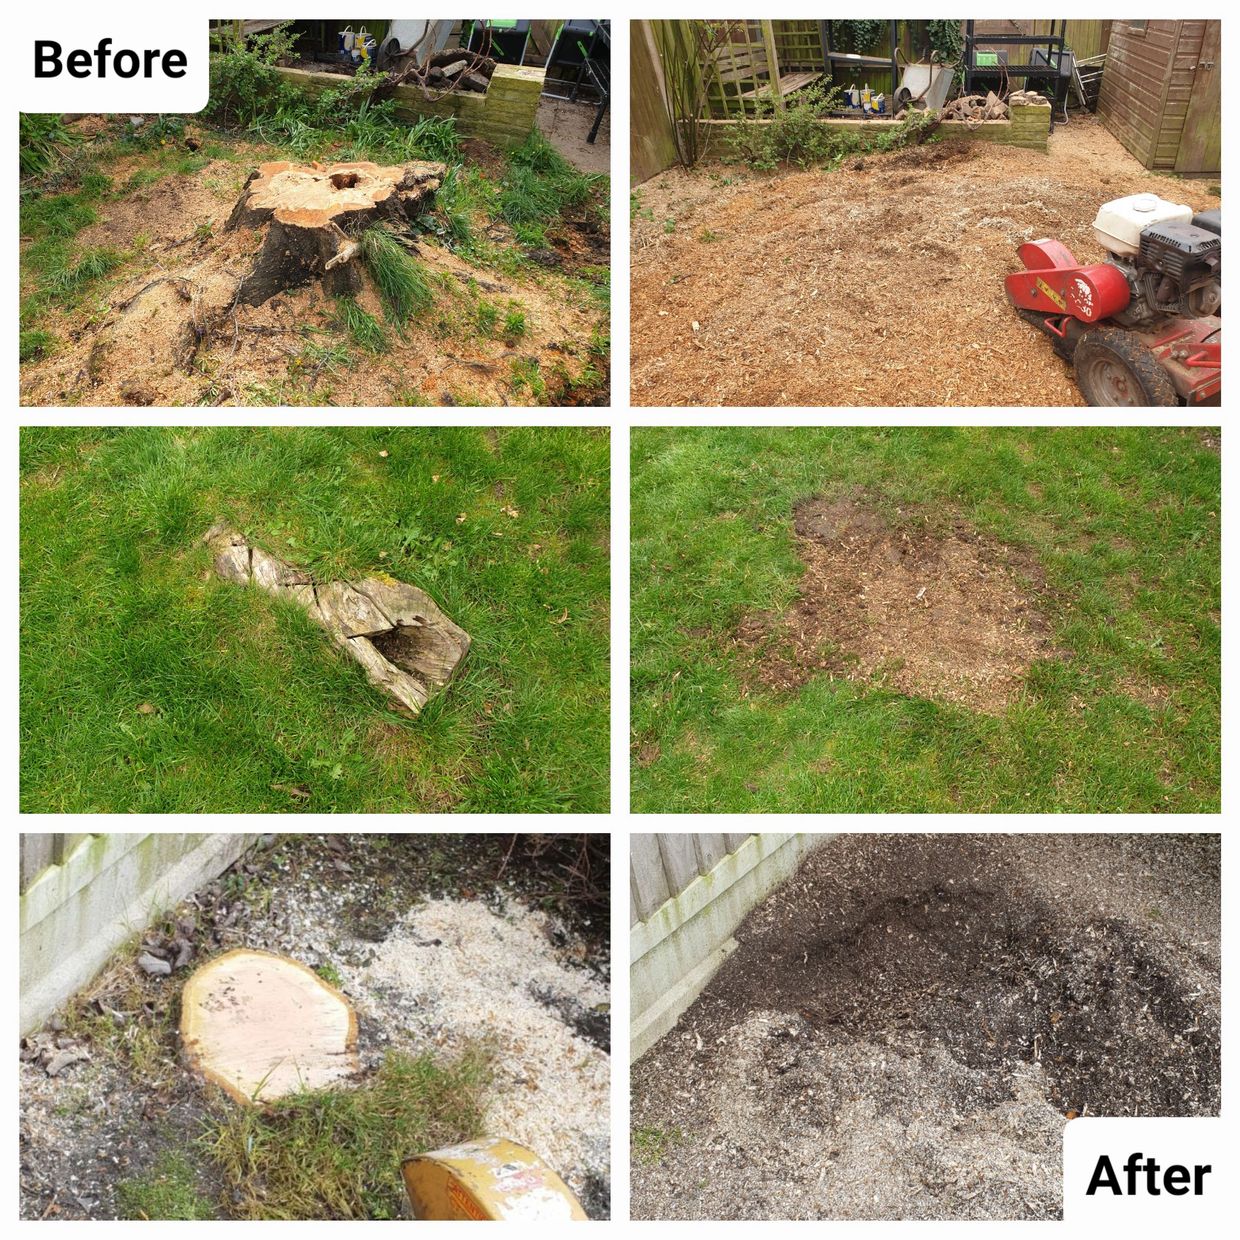 Before and after photo collage of stump grinding